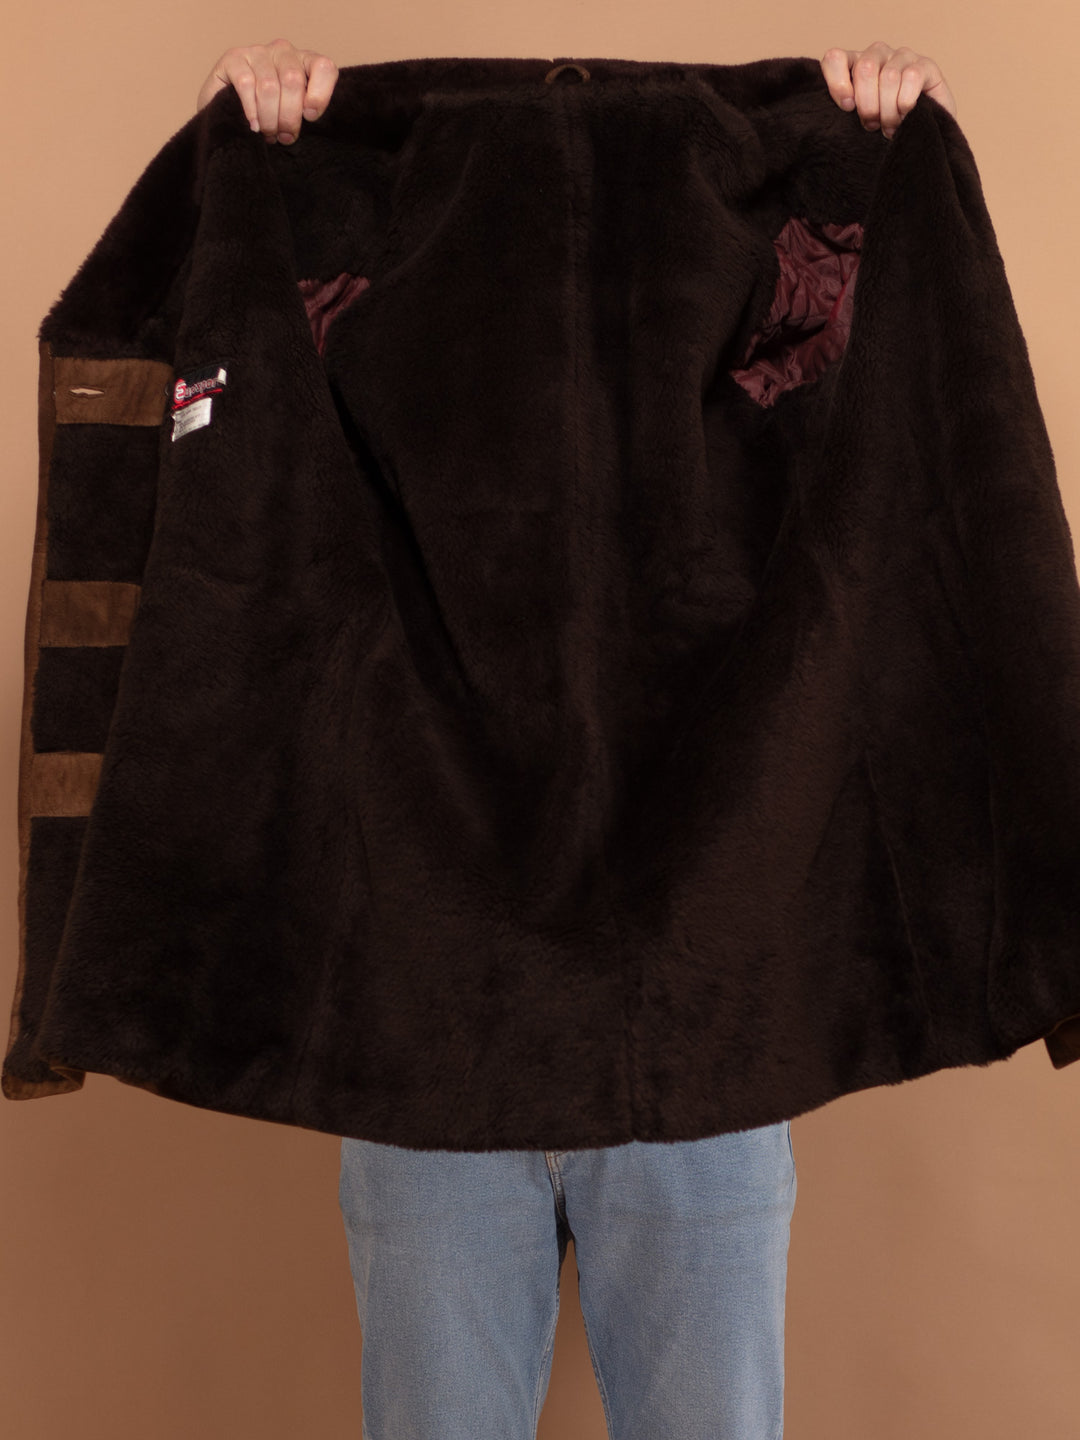 Double Breasted Suede Coat 90s, Size Large, Vintage Mens Brown Sherpa Coat, Faux Sheepskin Coat, Shearling Fur Collar Coat, Outerwear